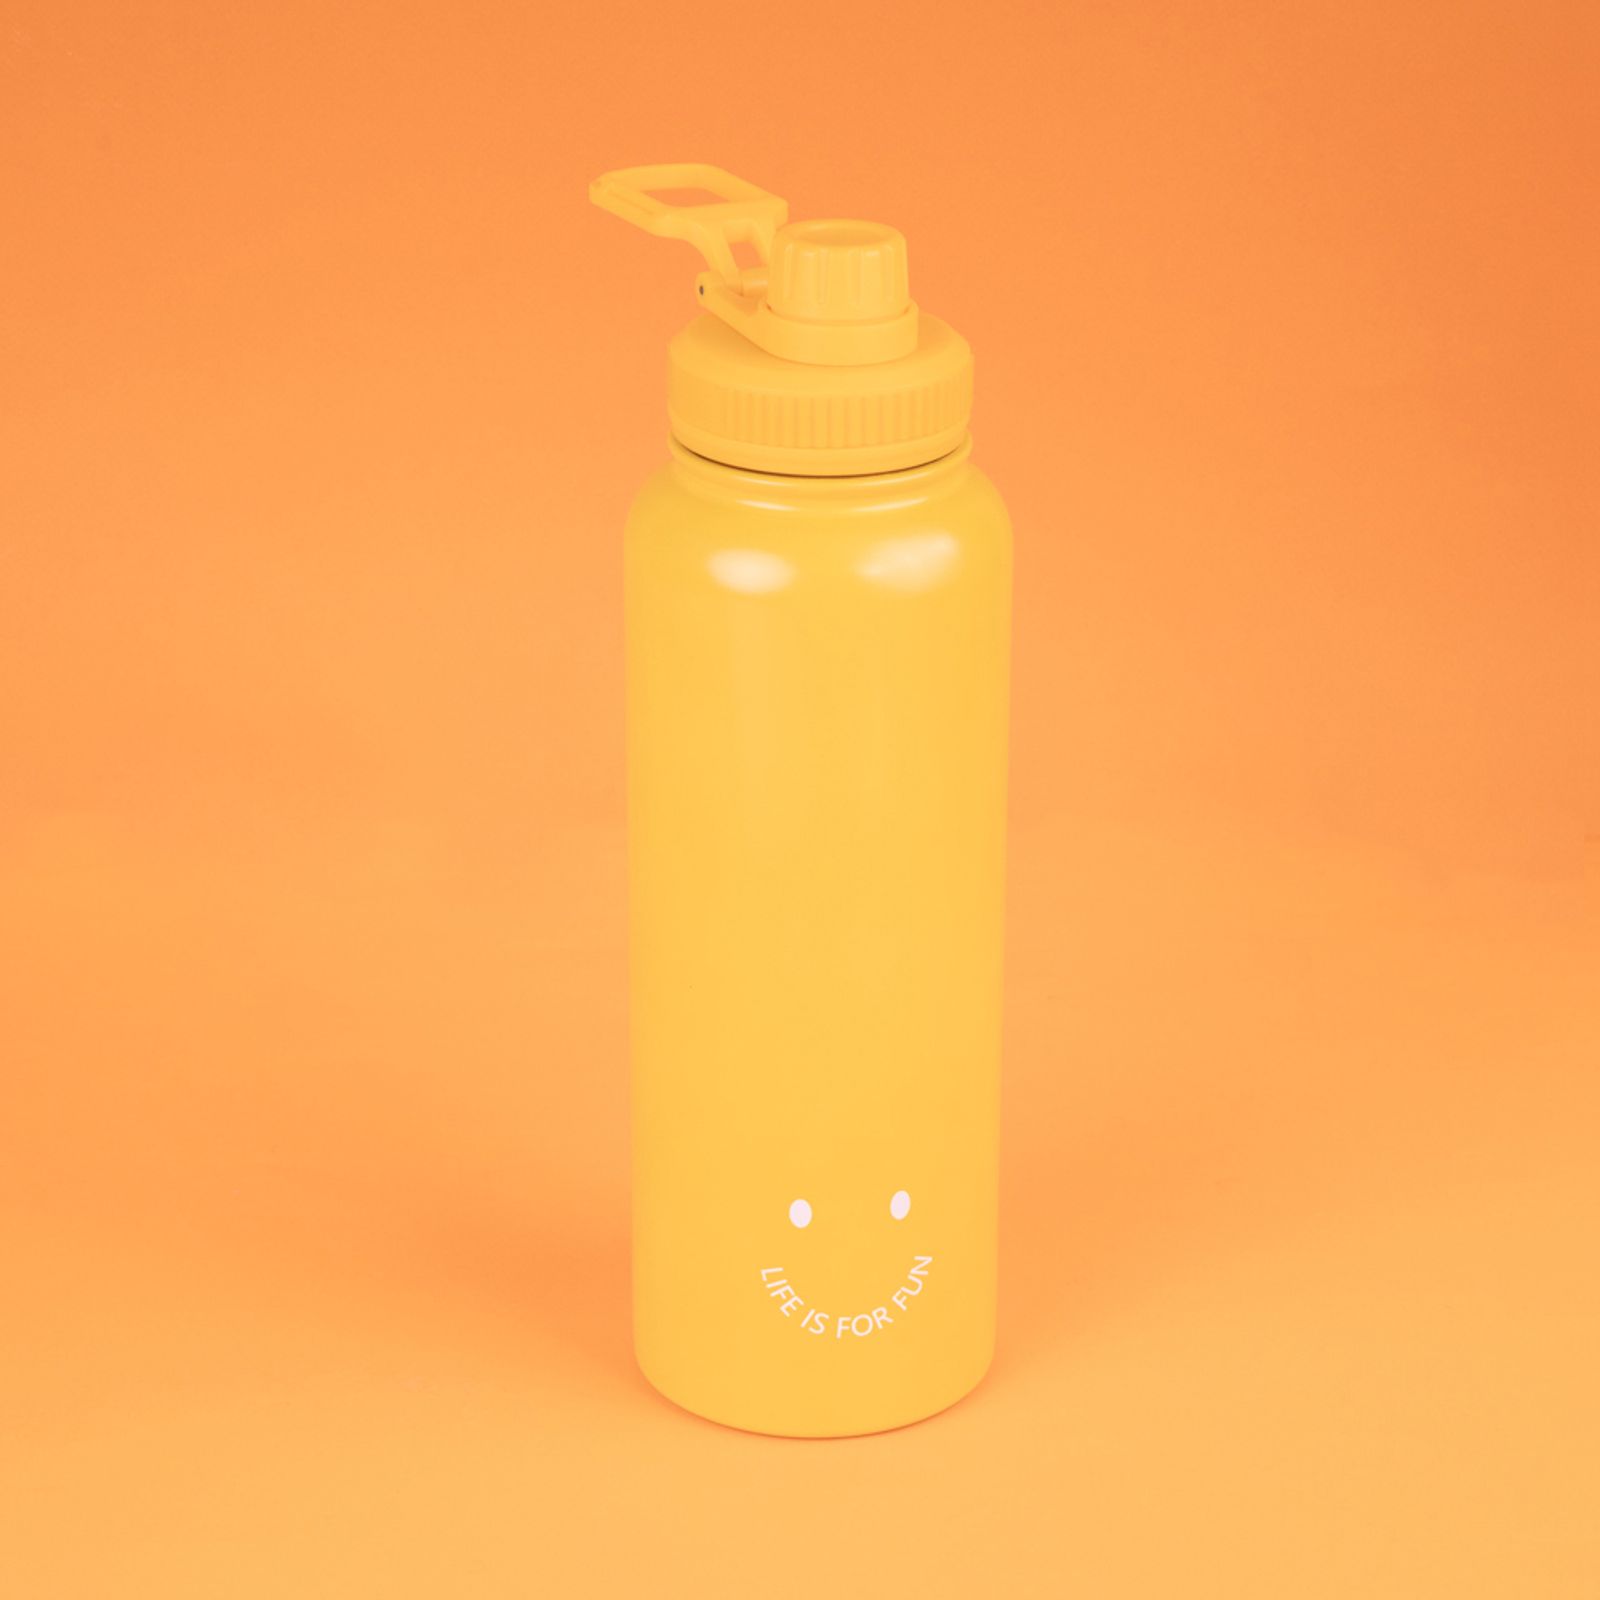 MINISO SOLID COLOR HANDHELD STAINLESS STEEL WATER BOTTLE 1.4L(YELLOW) 2015239615107 STEEL CUP-2